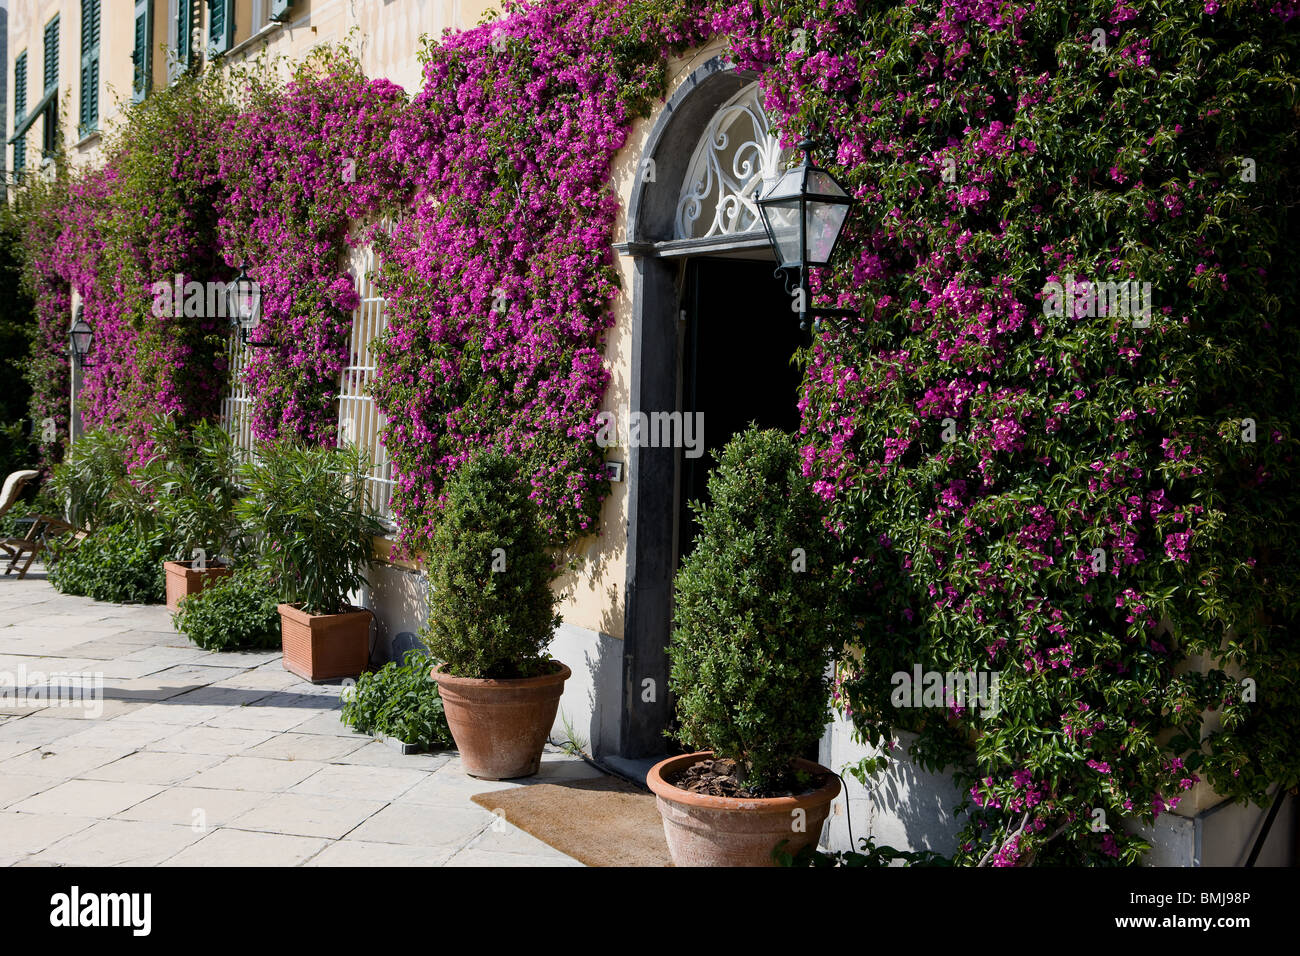 Italy, Liguria, house facade with flowers bougainvillea, and windows Stock Photo